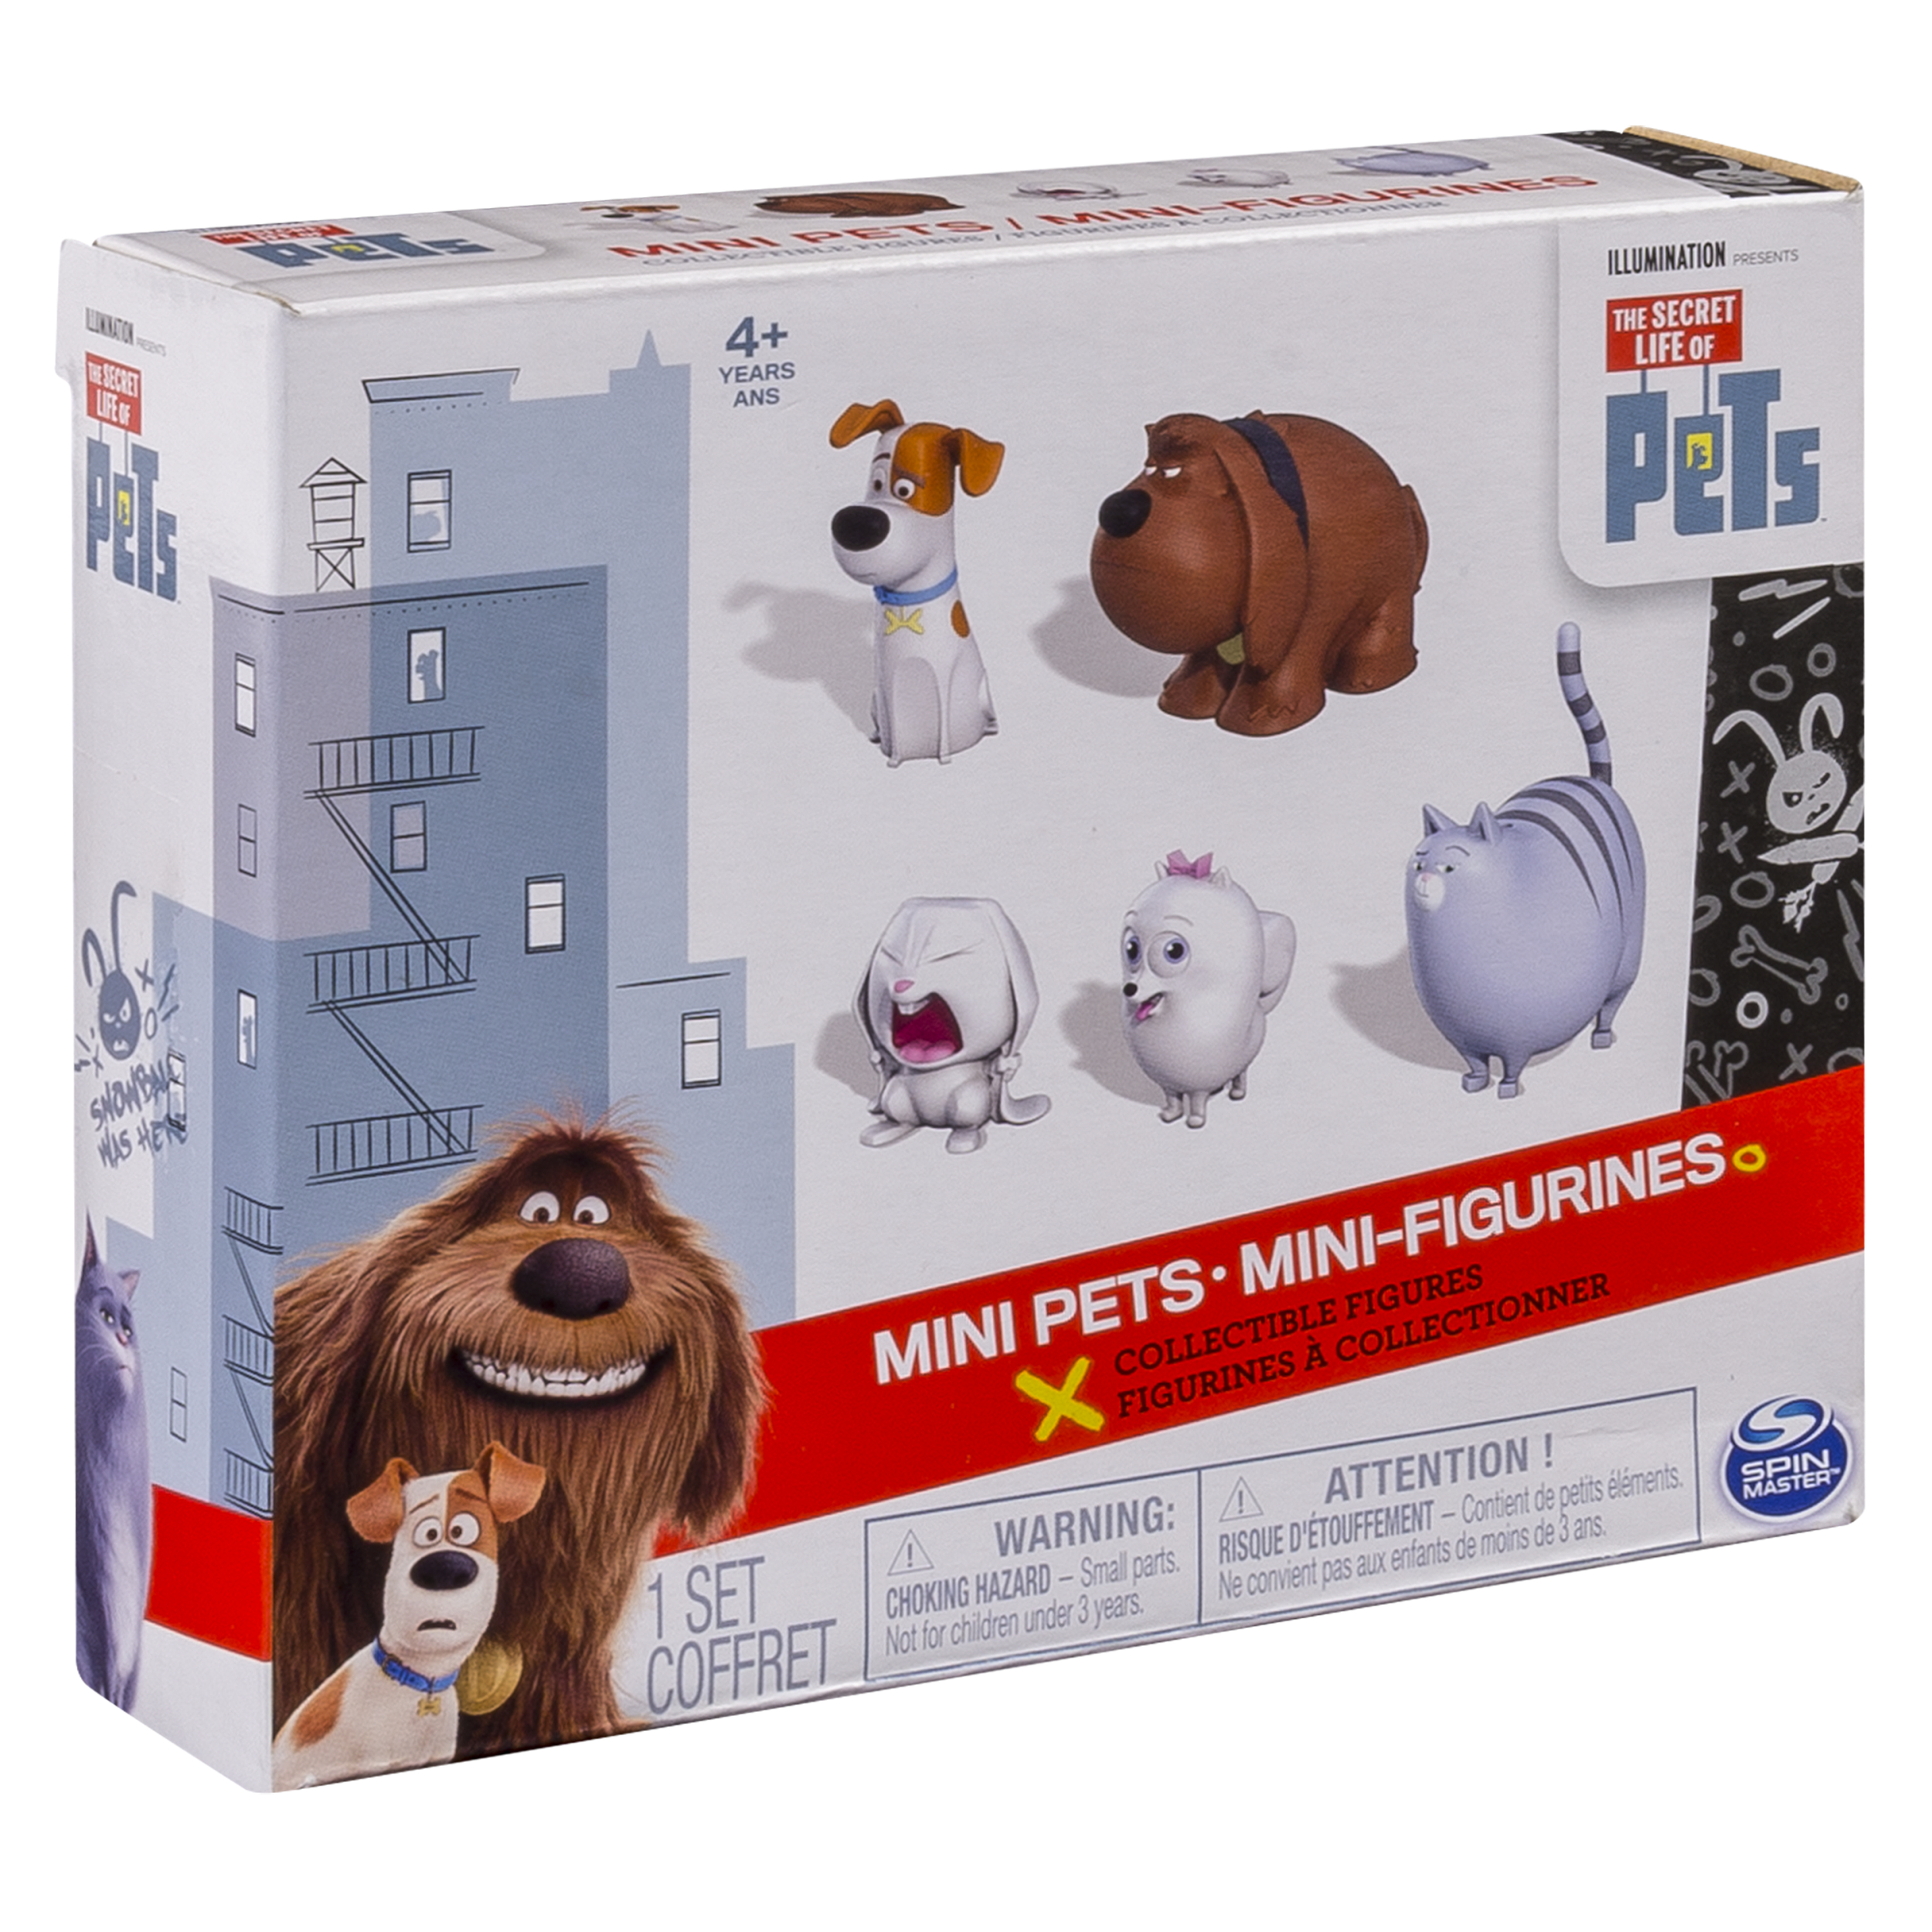 The Secret Life of Pets - Mini Pets Collectible Figures 5-Pack - image 3 of 3